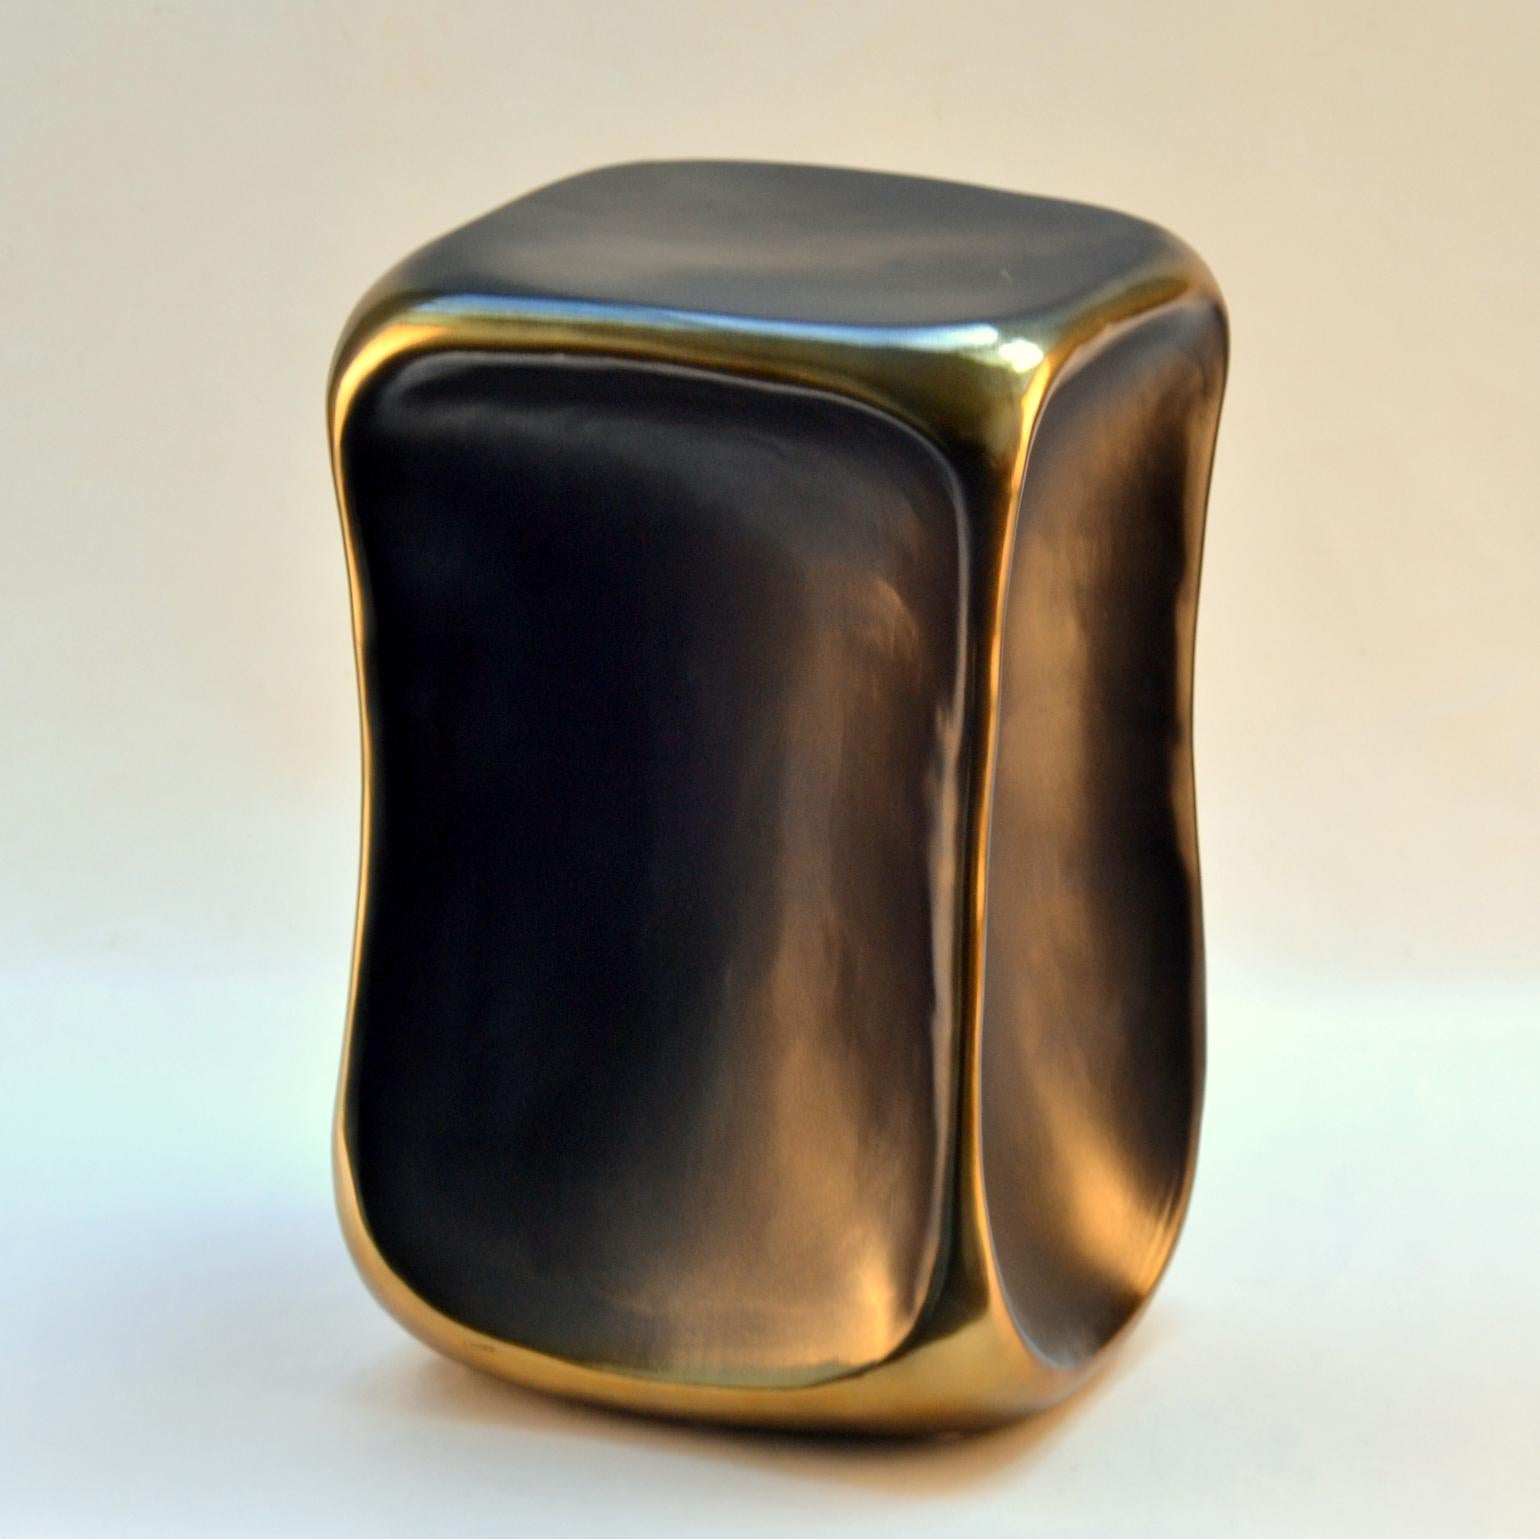 Sculptural black and gold side table with square top and rounded corners and accented golden ribs is cast in ceramic.